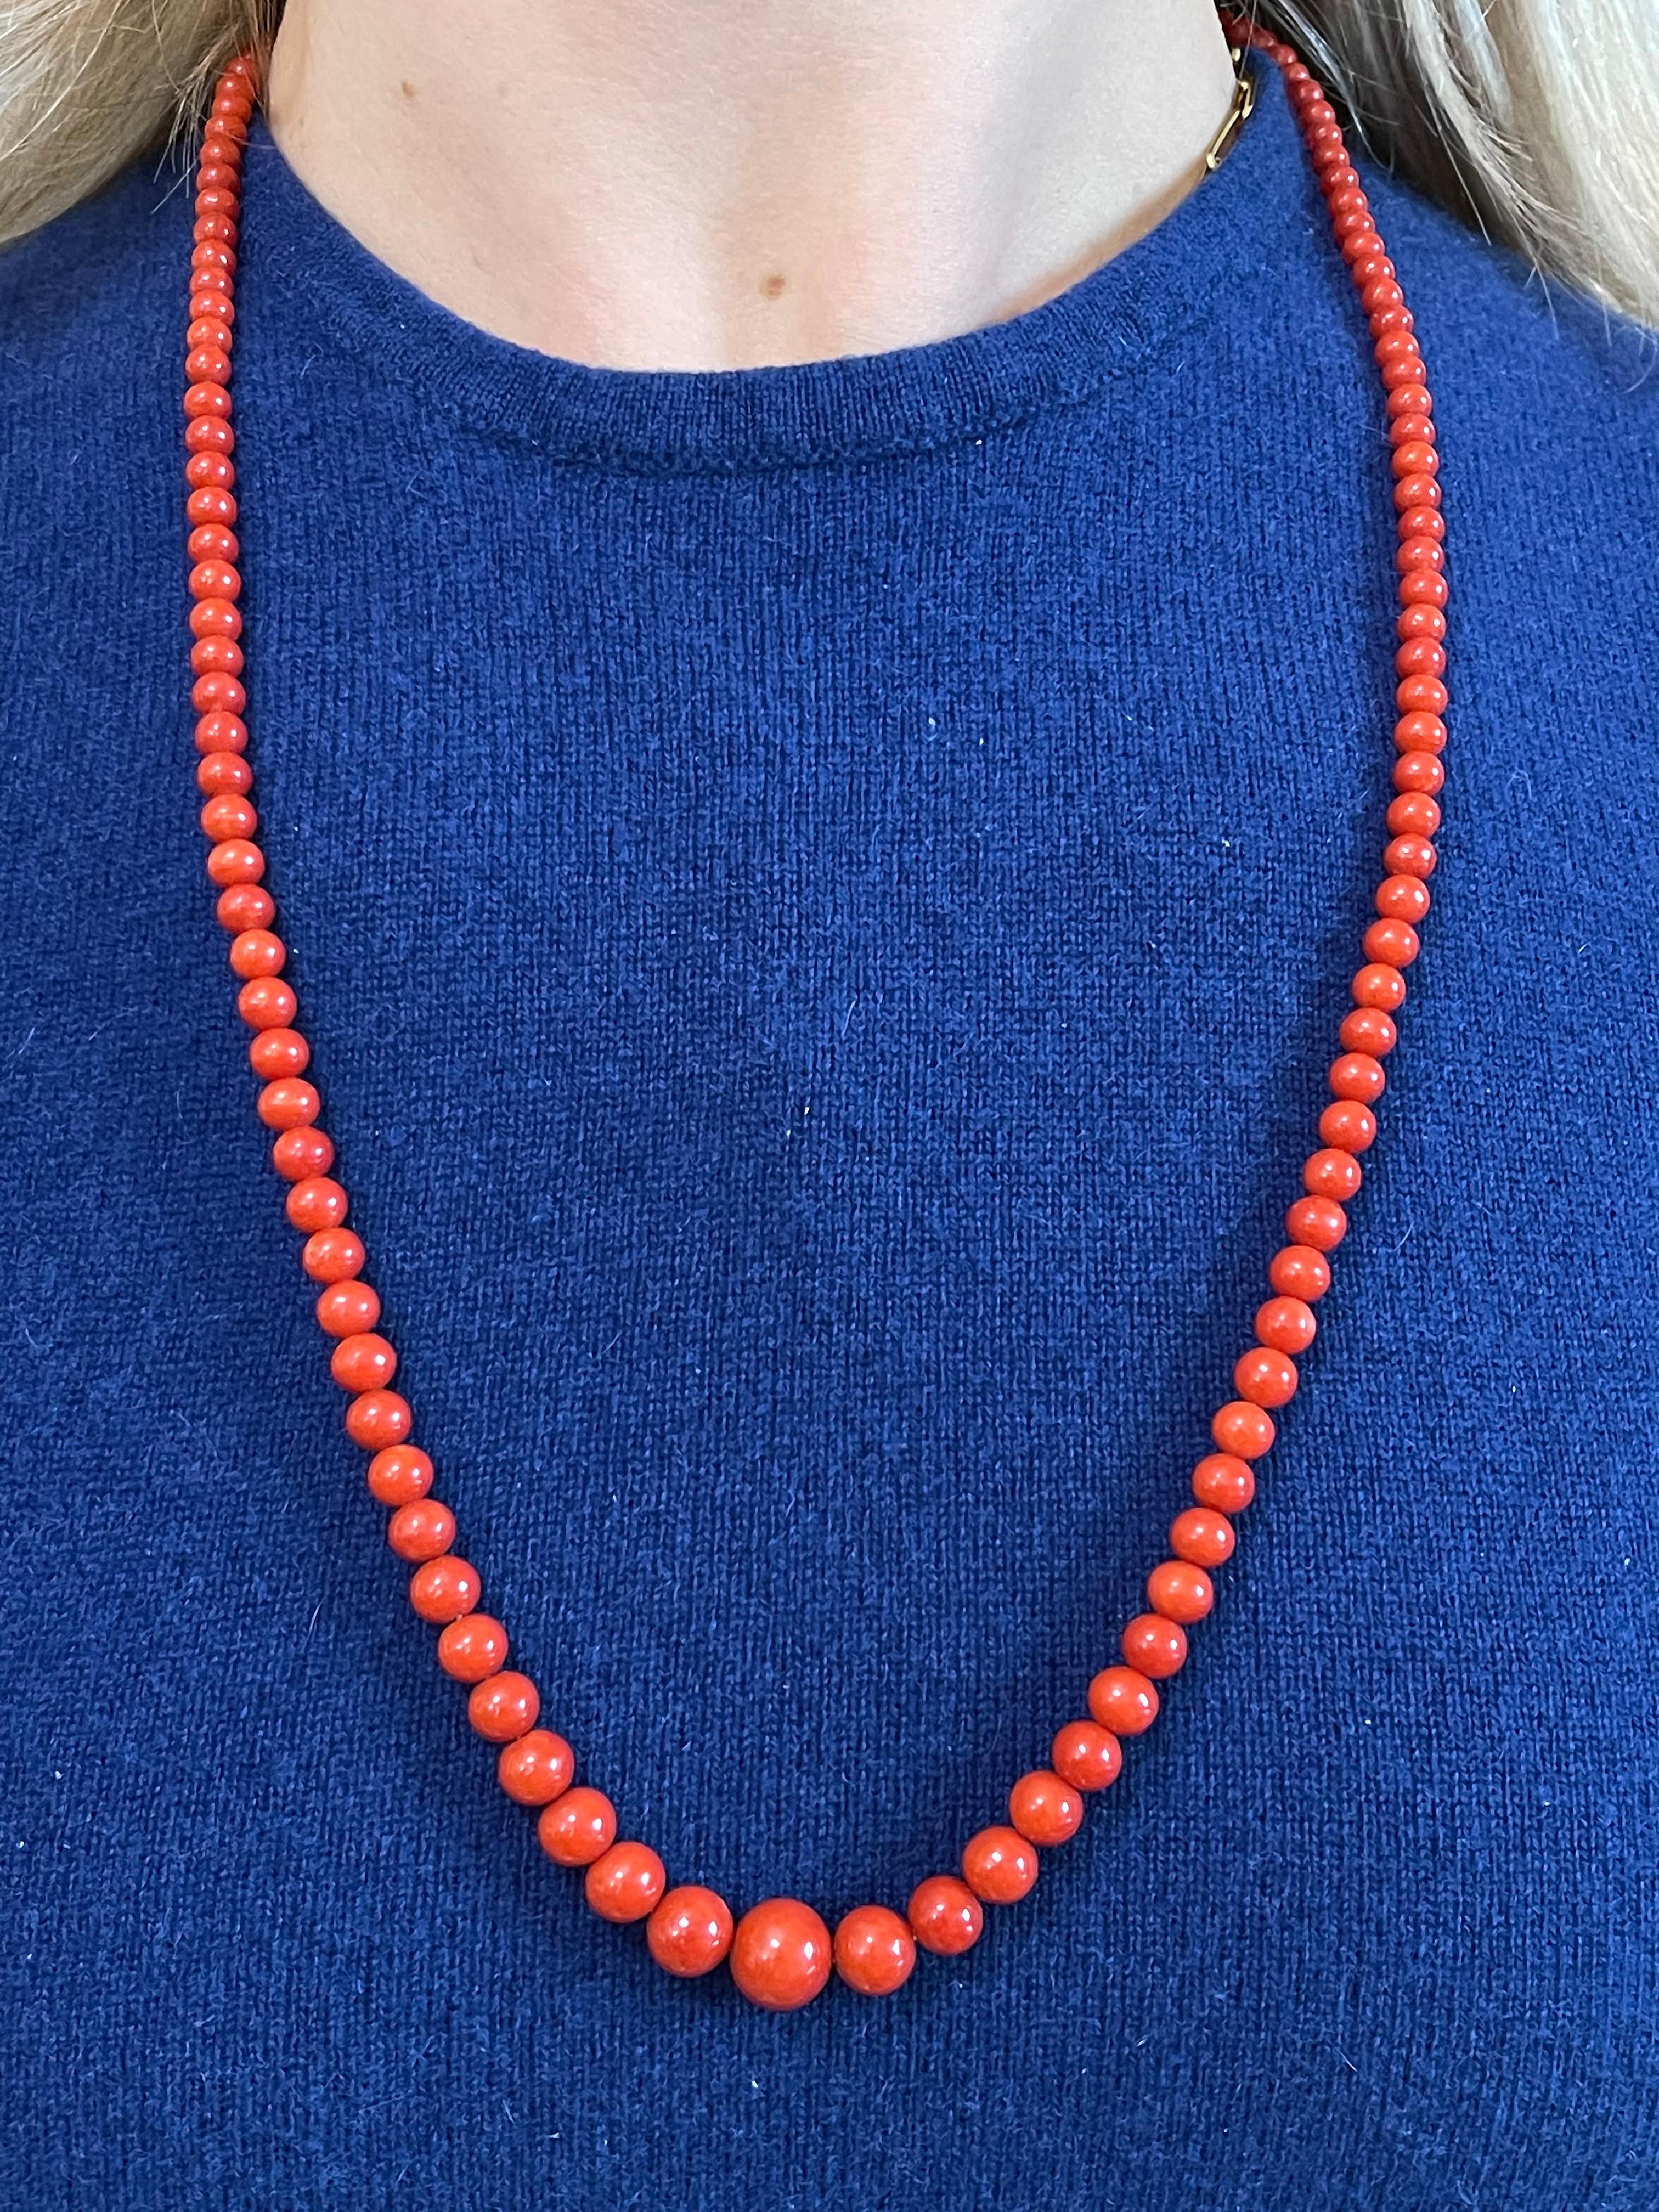 Antique Graduated Coral Bead Gold Necklace In Excellent Condition For Sale In New York, NY